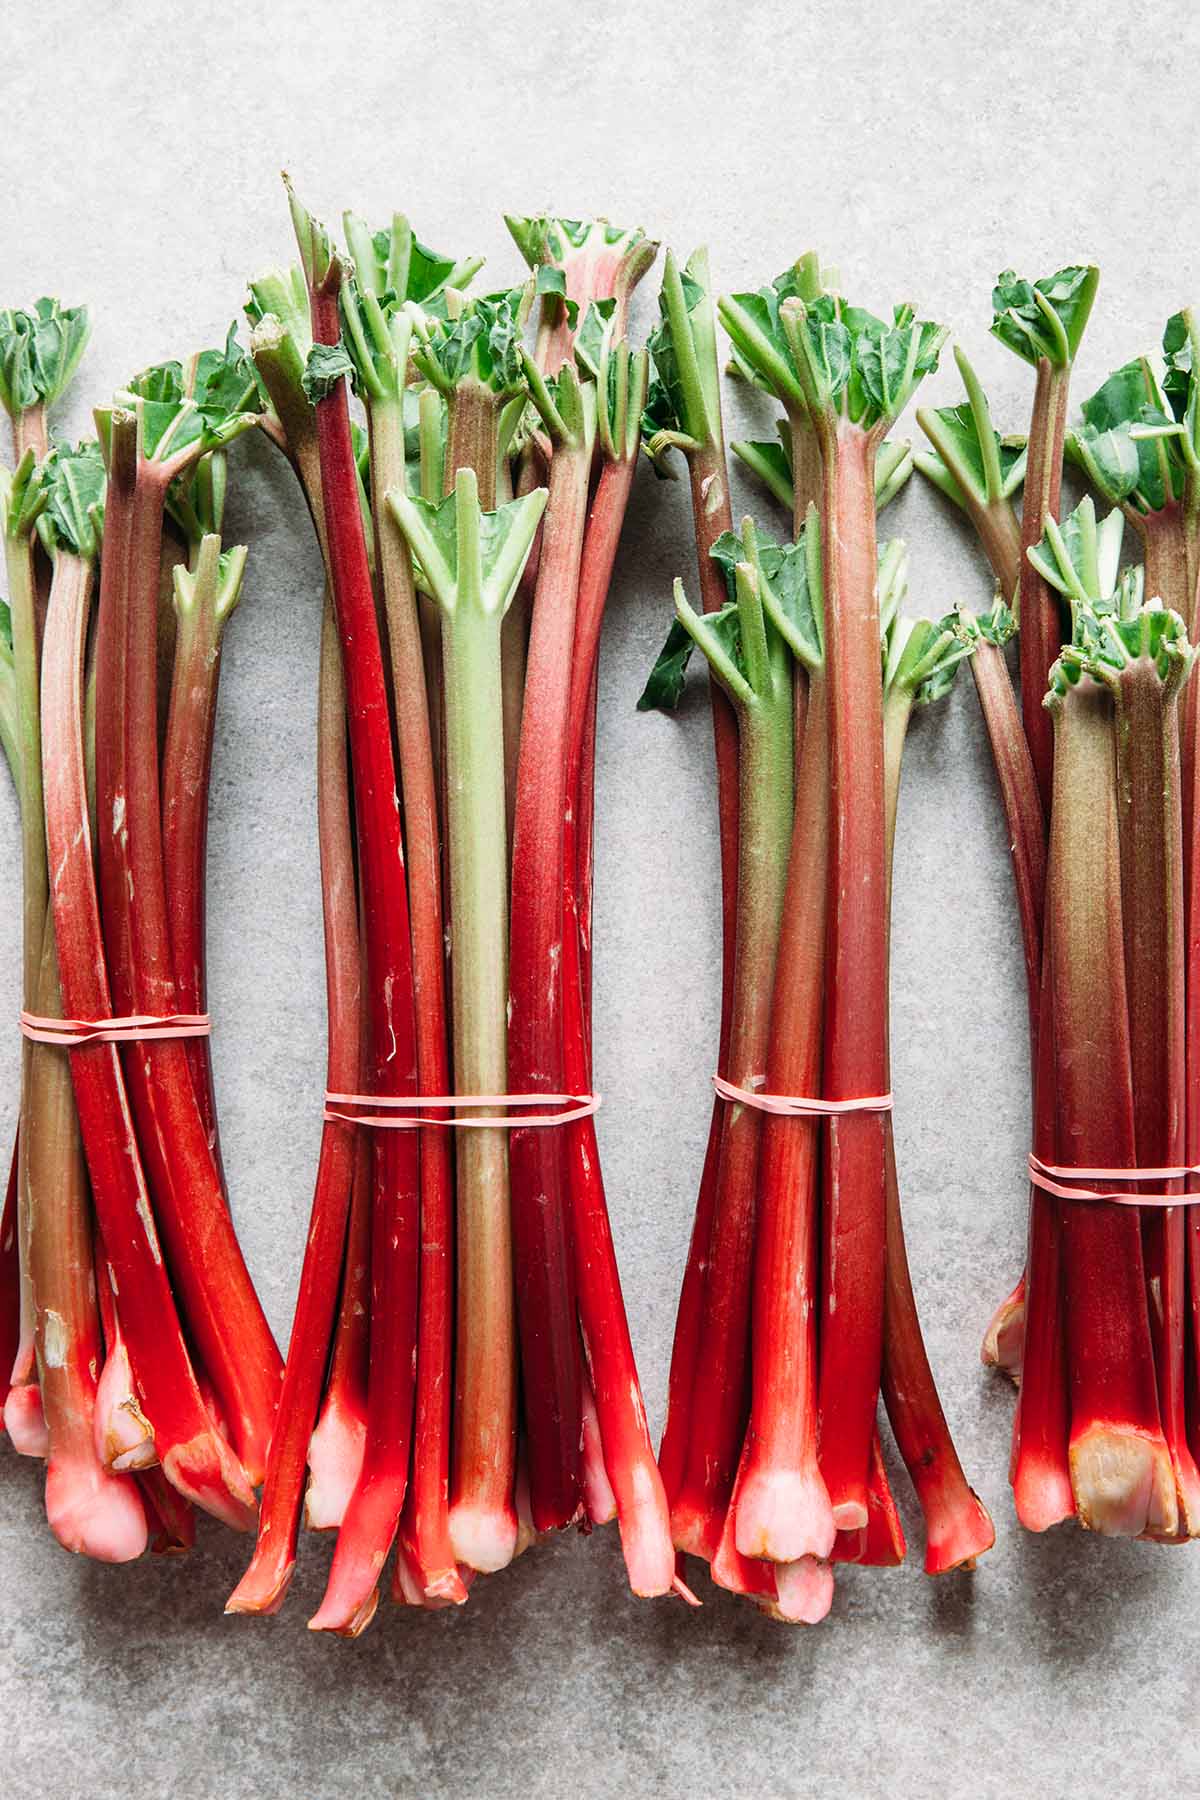 Bunches of fresh rhubarb bound with pink elastic bands.